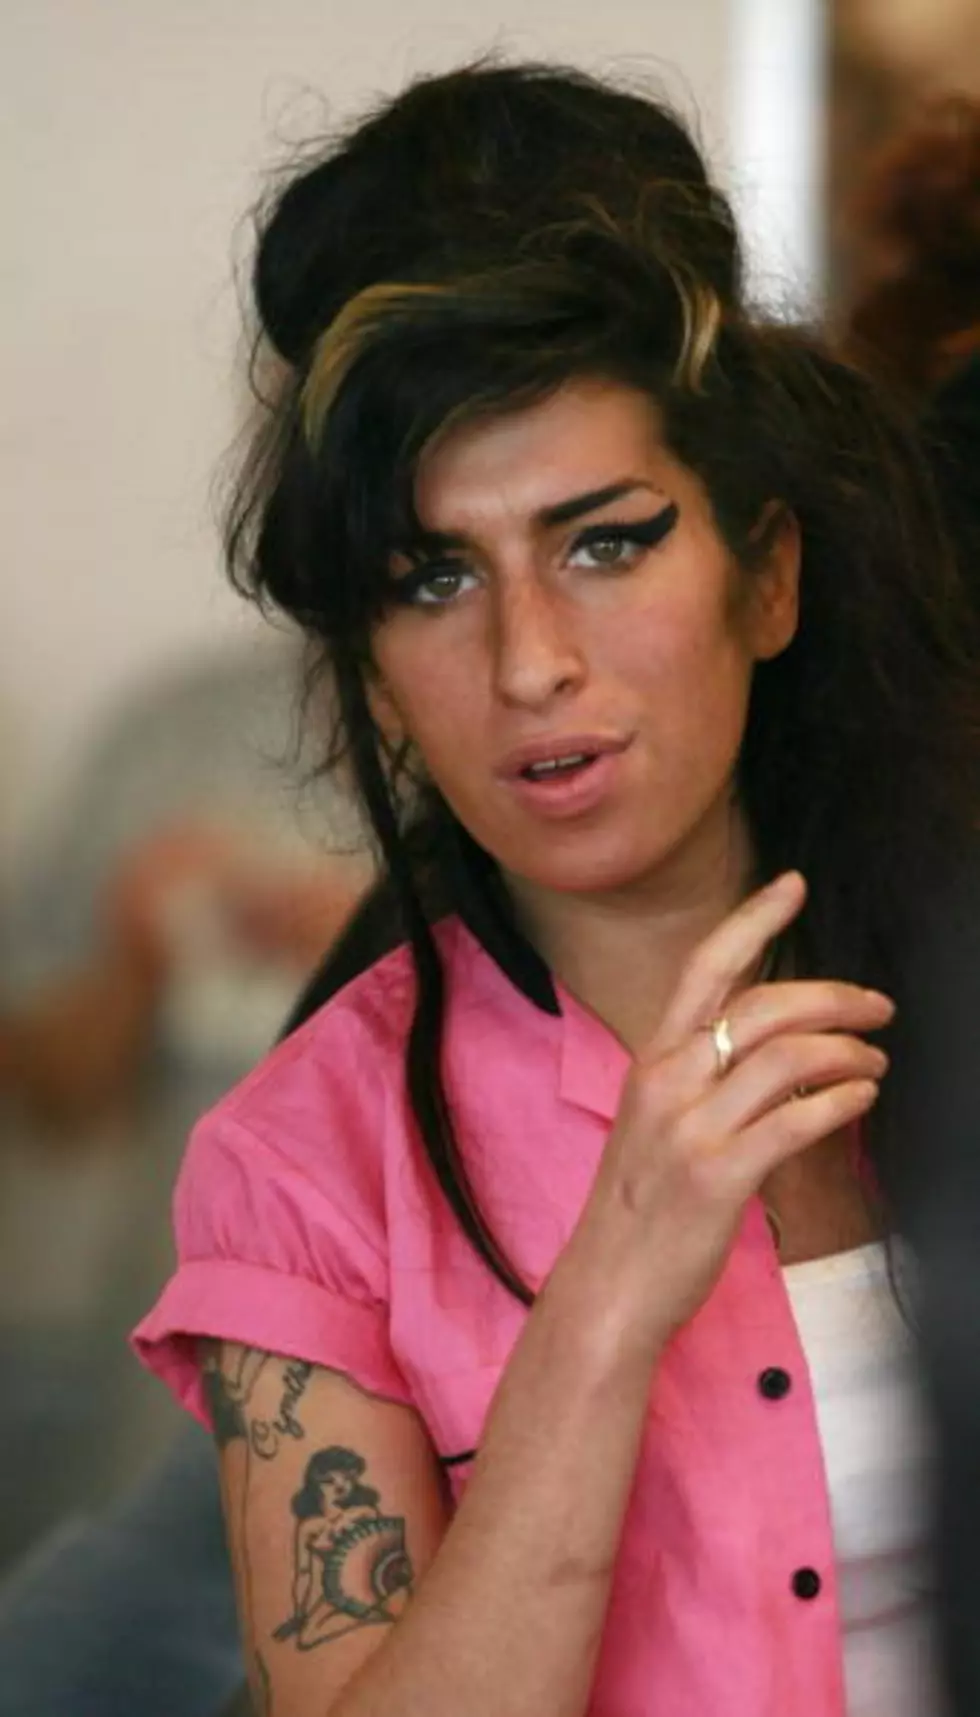 Amy Winehouse Joins the 27 Club